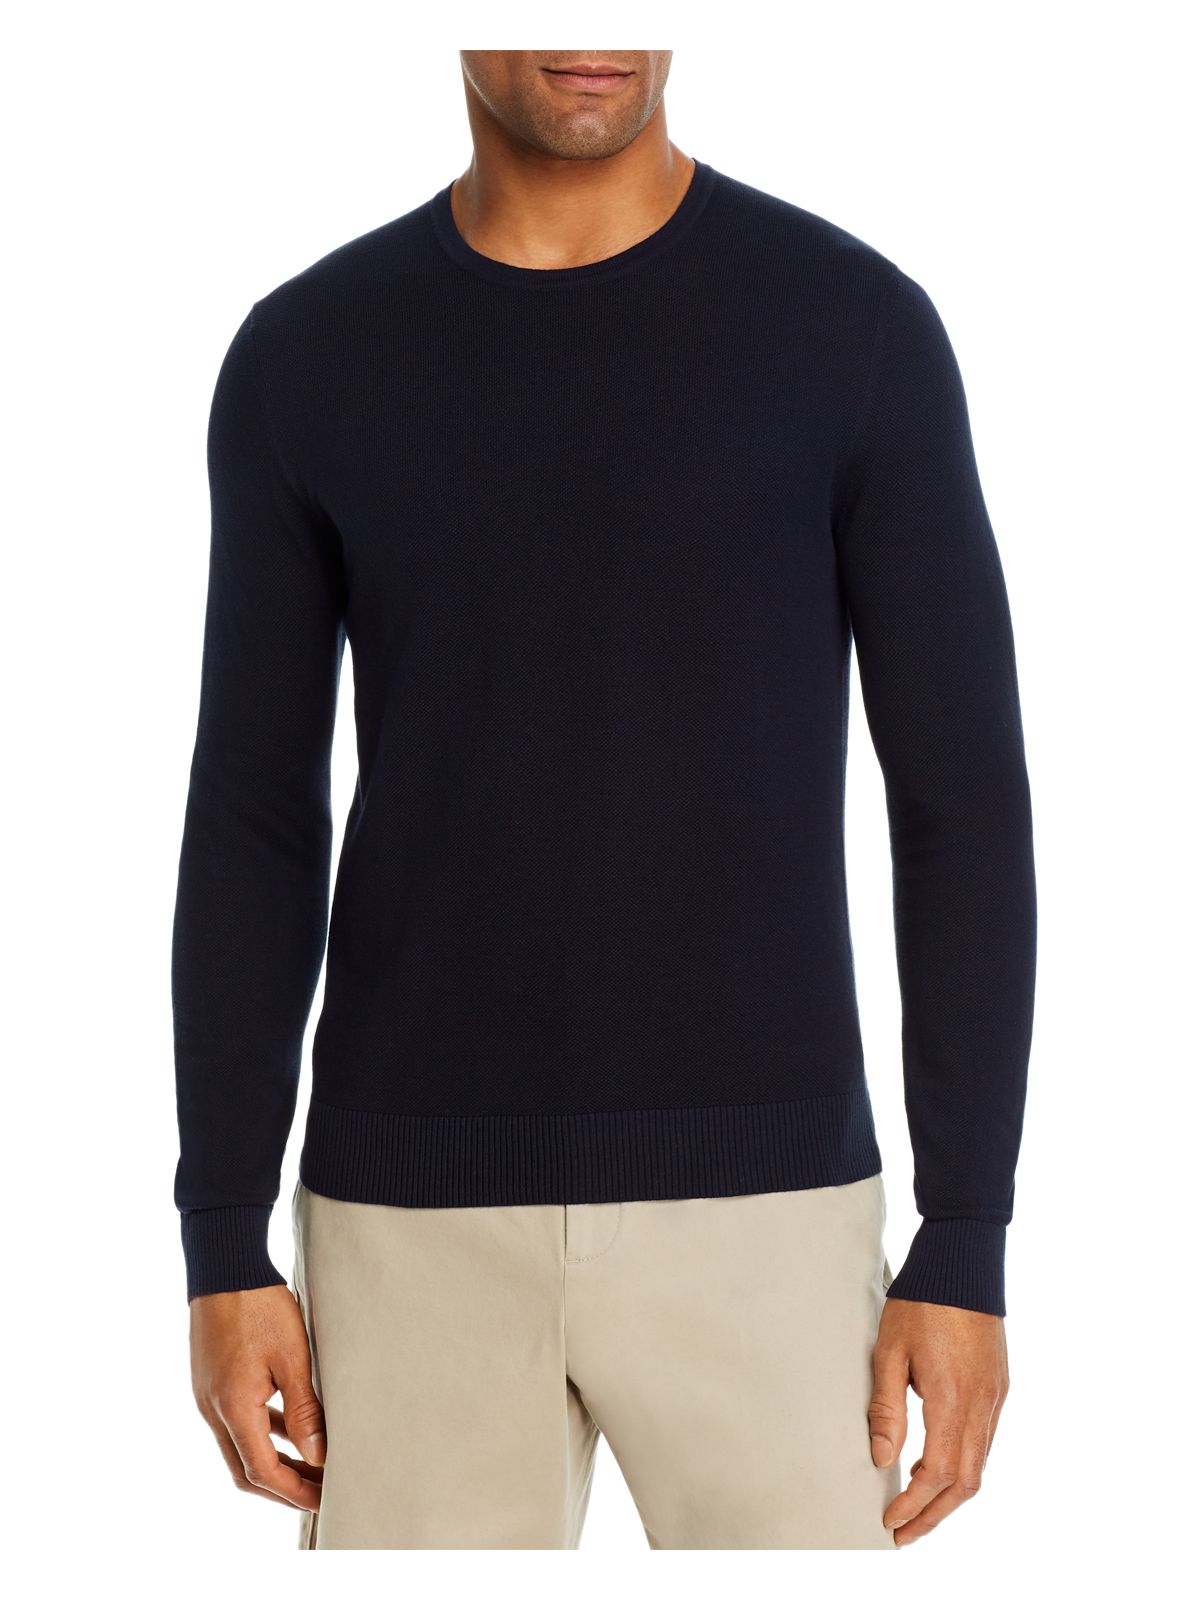 DYLAN GRAY Mens Navy Long Sleeve Crew Neck Classic Fit Sweater L